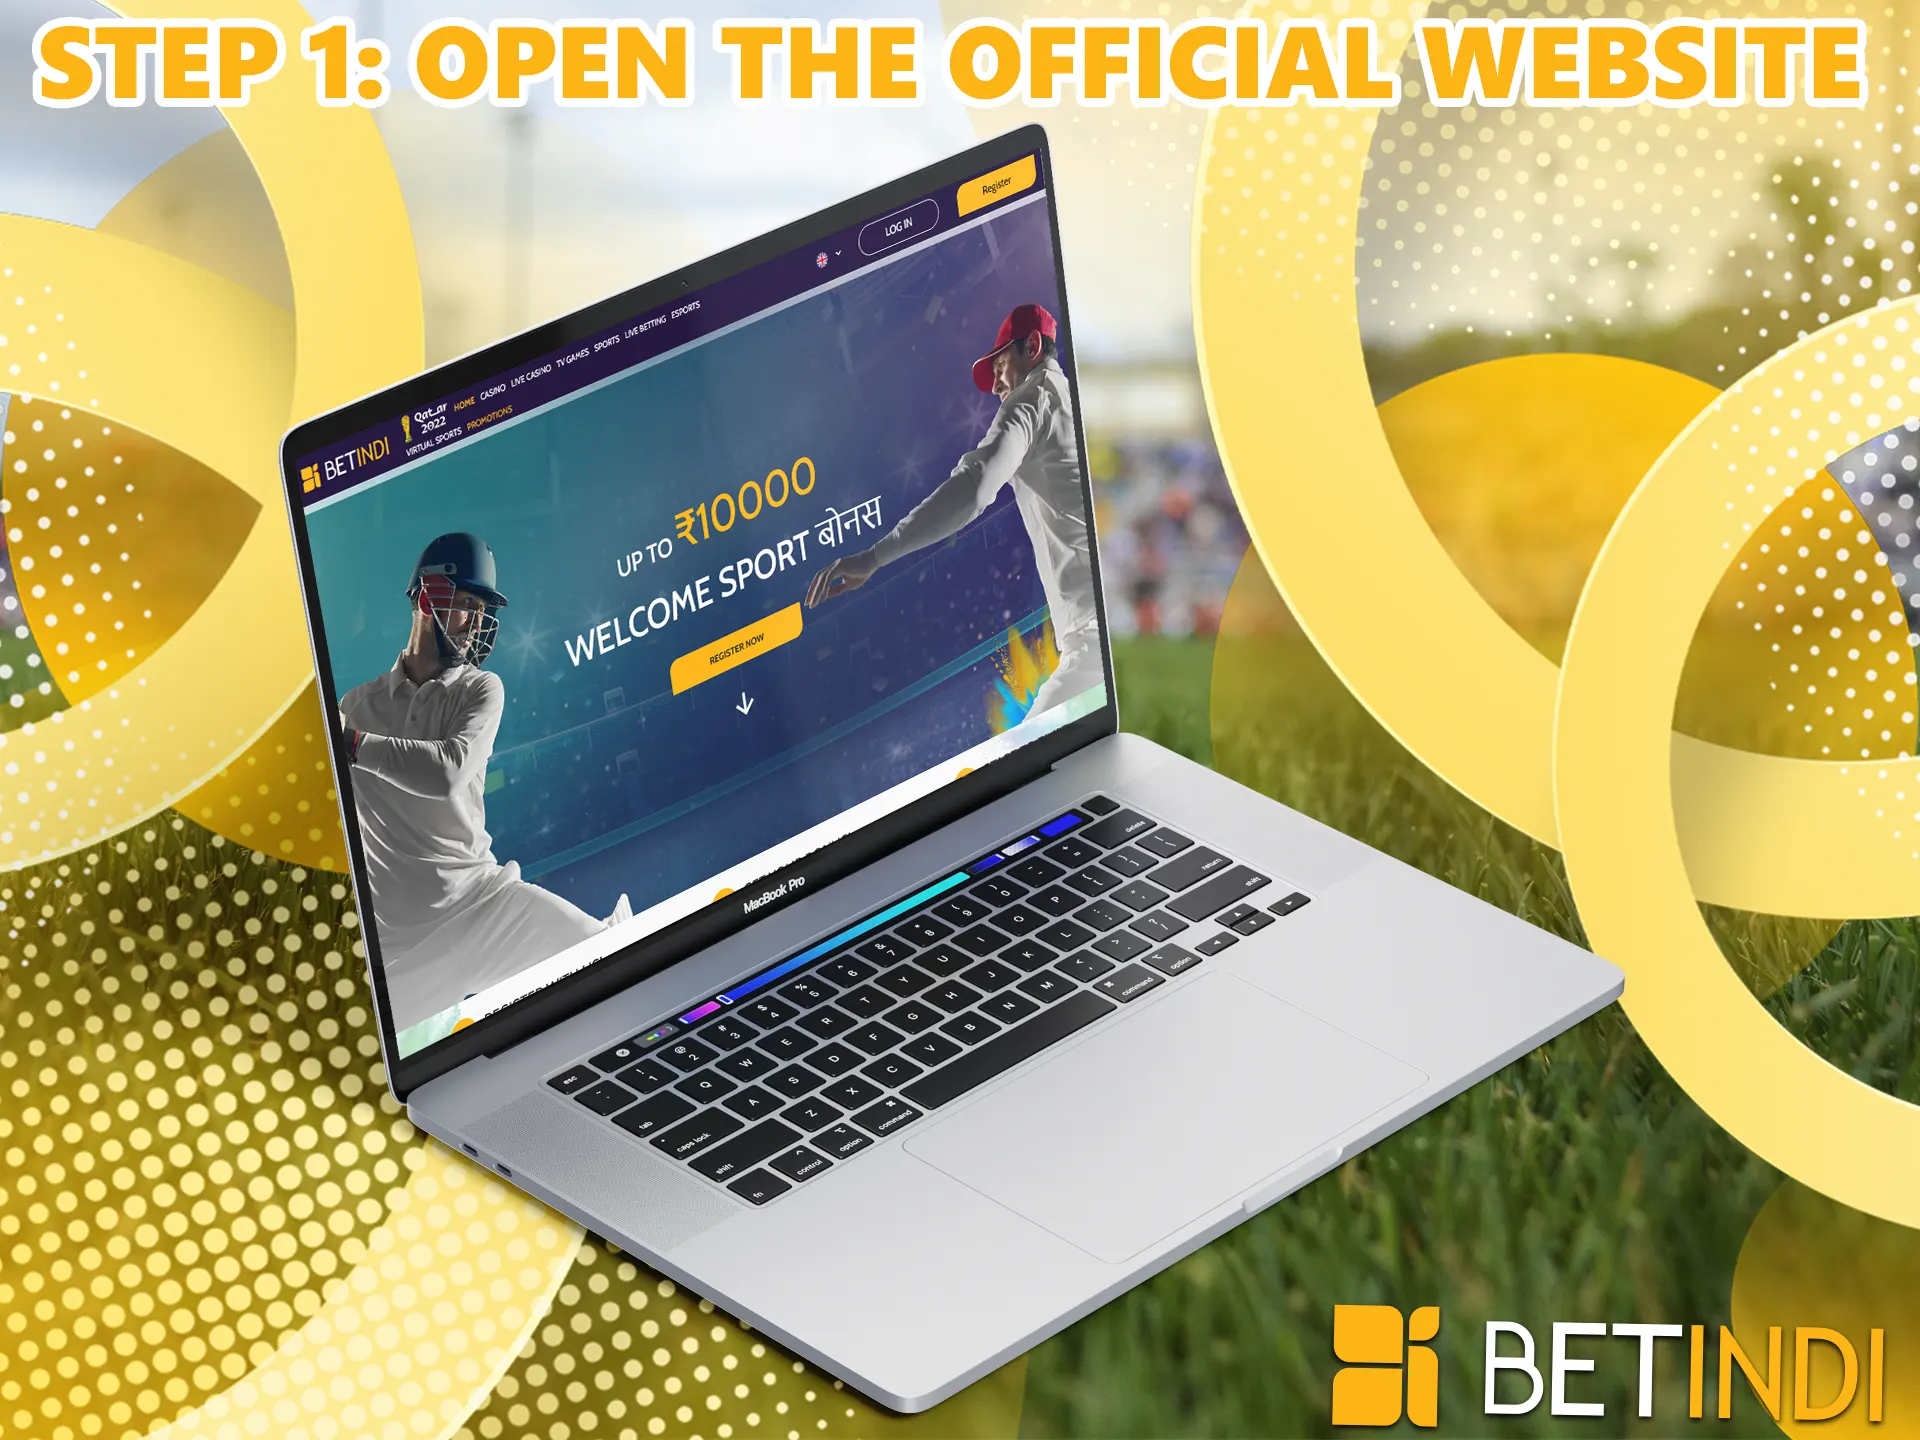 Start your acquaintance by following the link to the BetIndi betting site, it can be found in the header of the article.